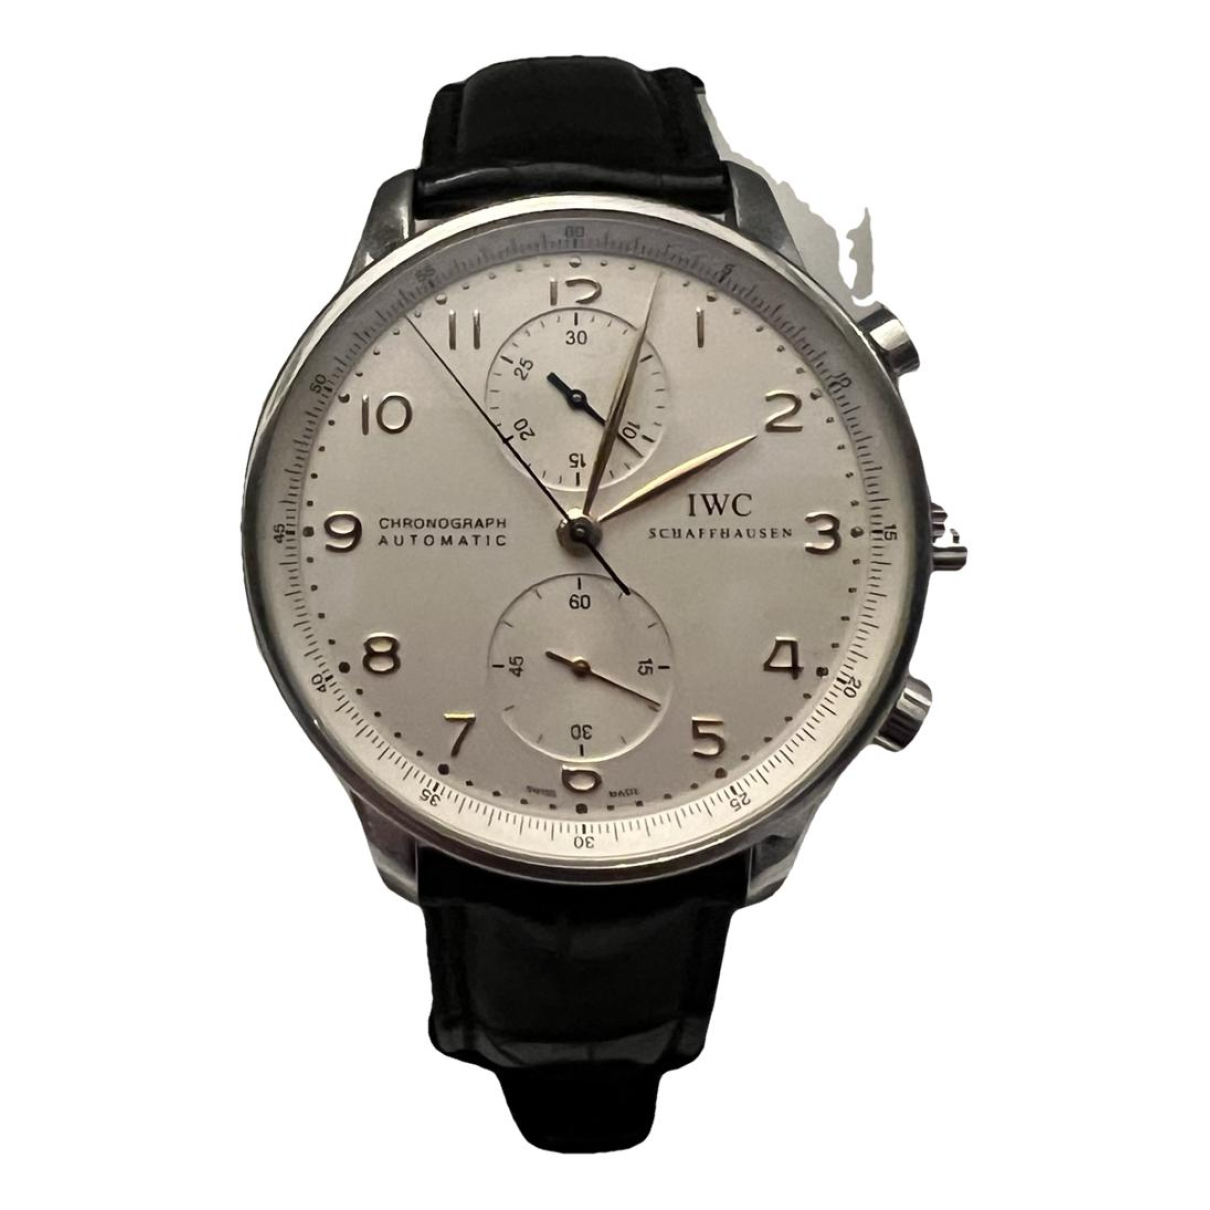 Image of IWC Portugaise watch